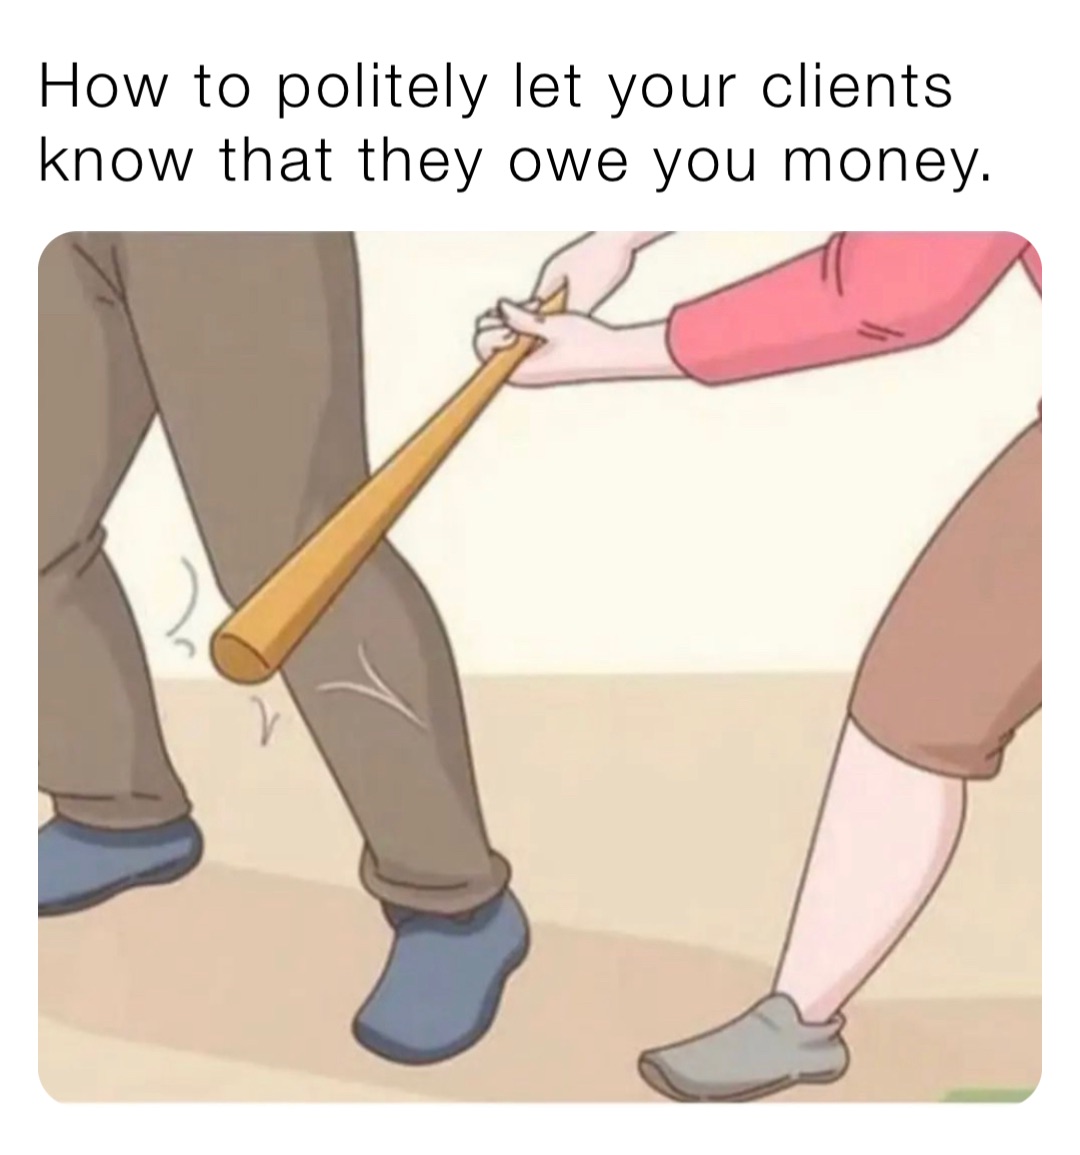 How to politely let your clients know that they owe you money.